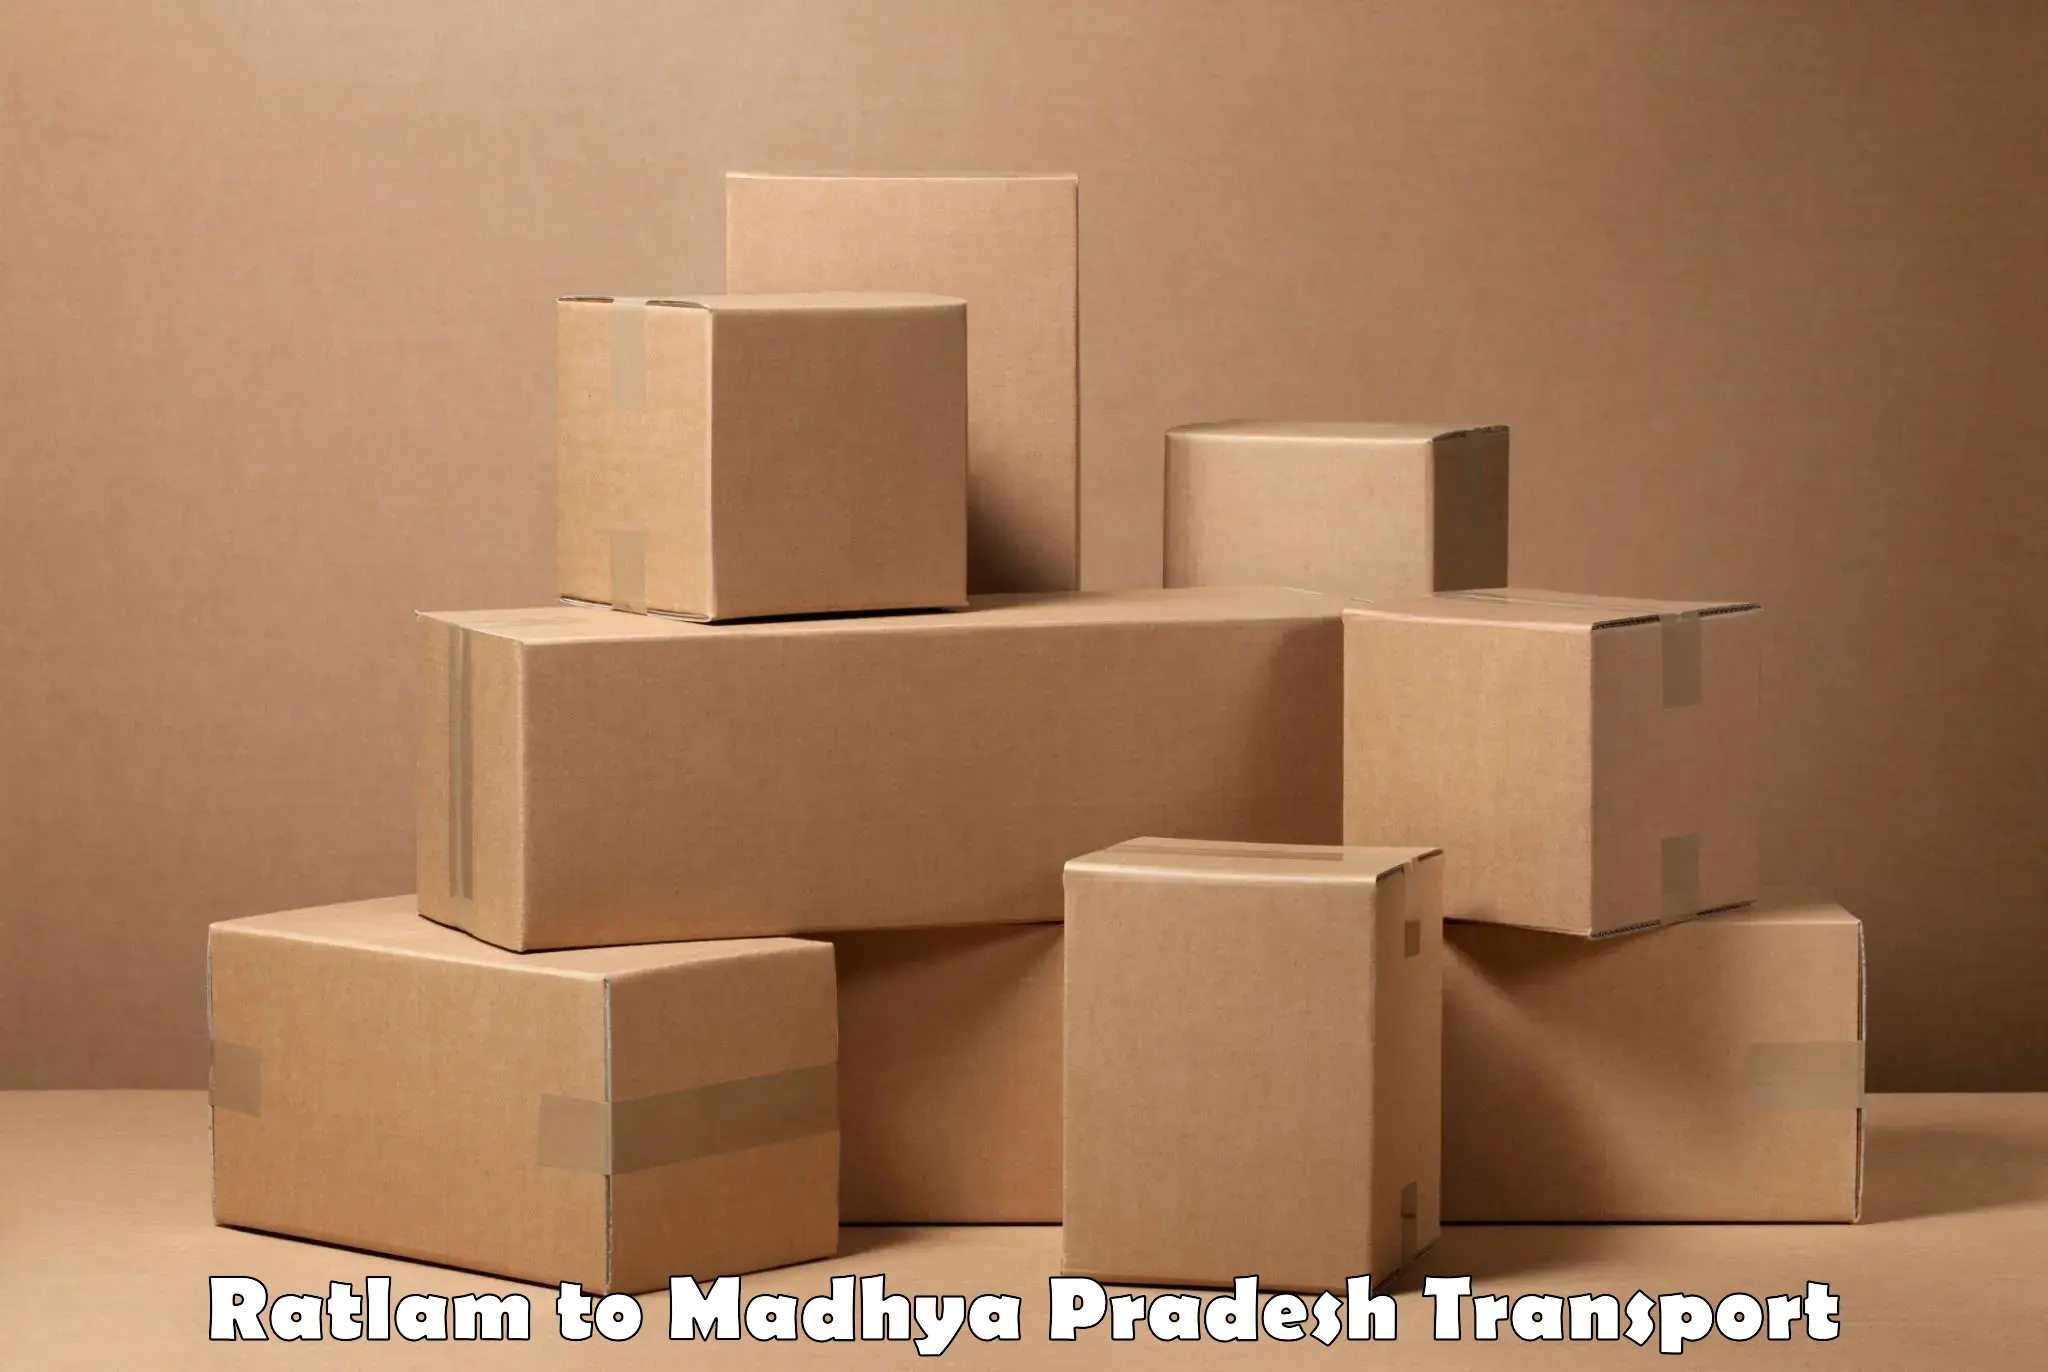 Express transport services in Ratlam to Malanjkhand